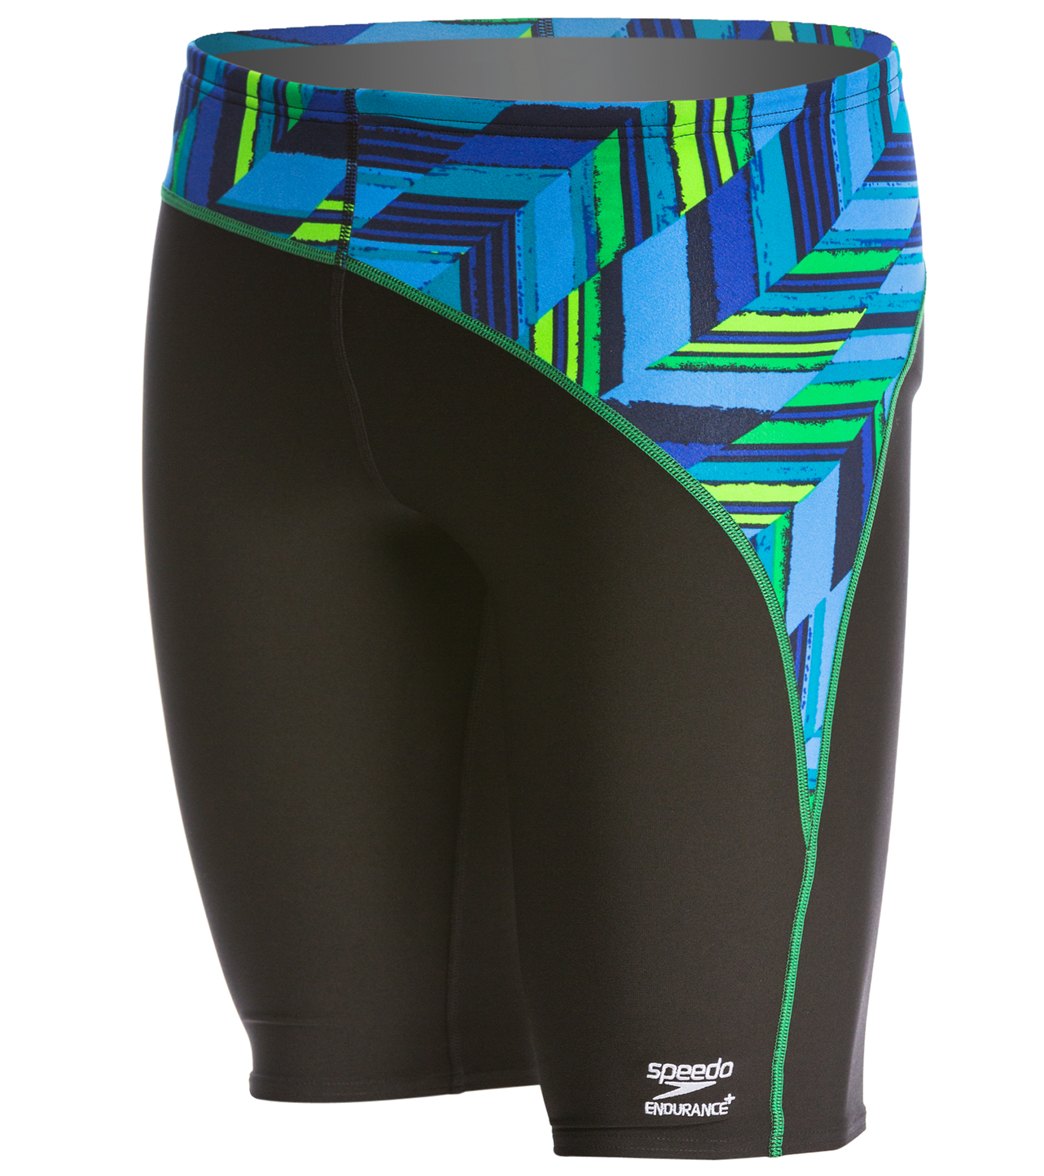 Speedo Endurance+ Angles Jammer Swimsuit at SwimOutlet.com - Free Shipping